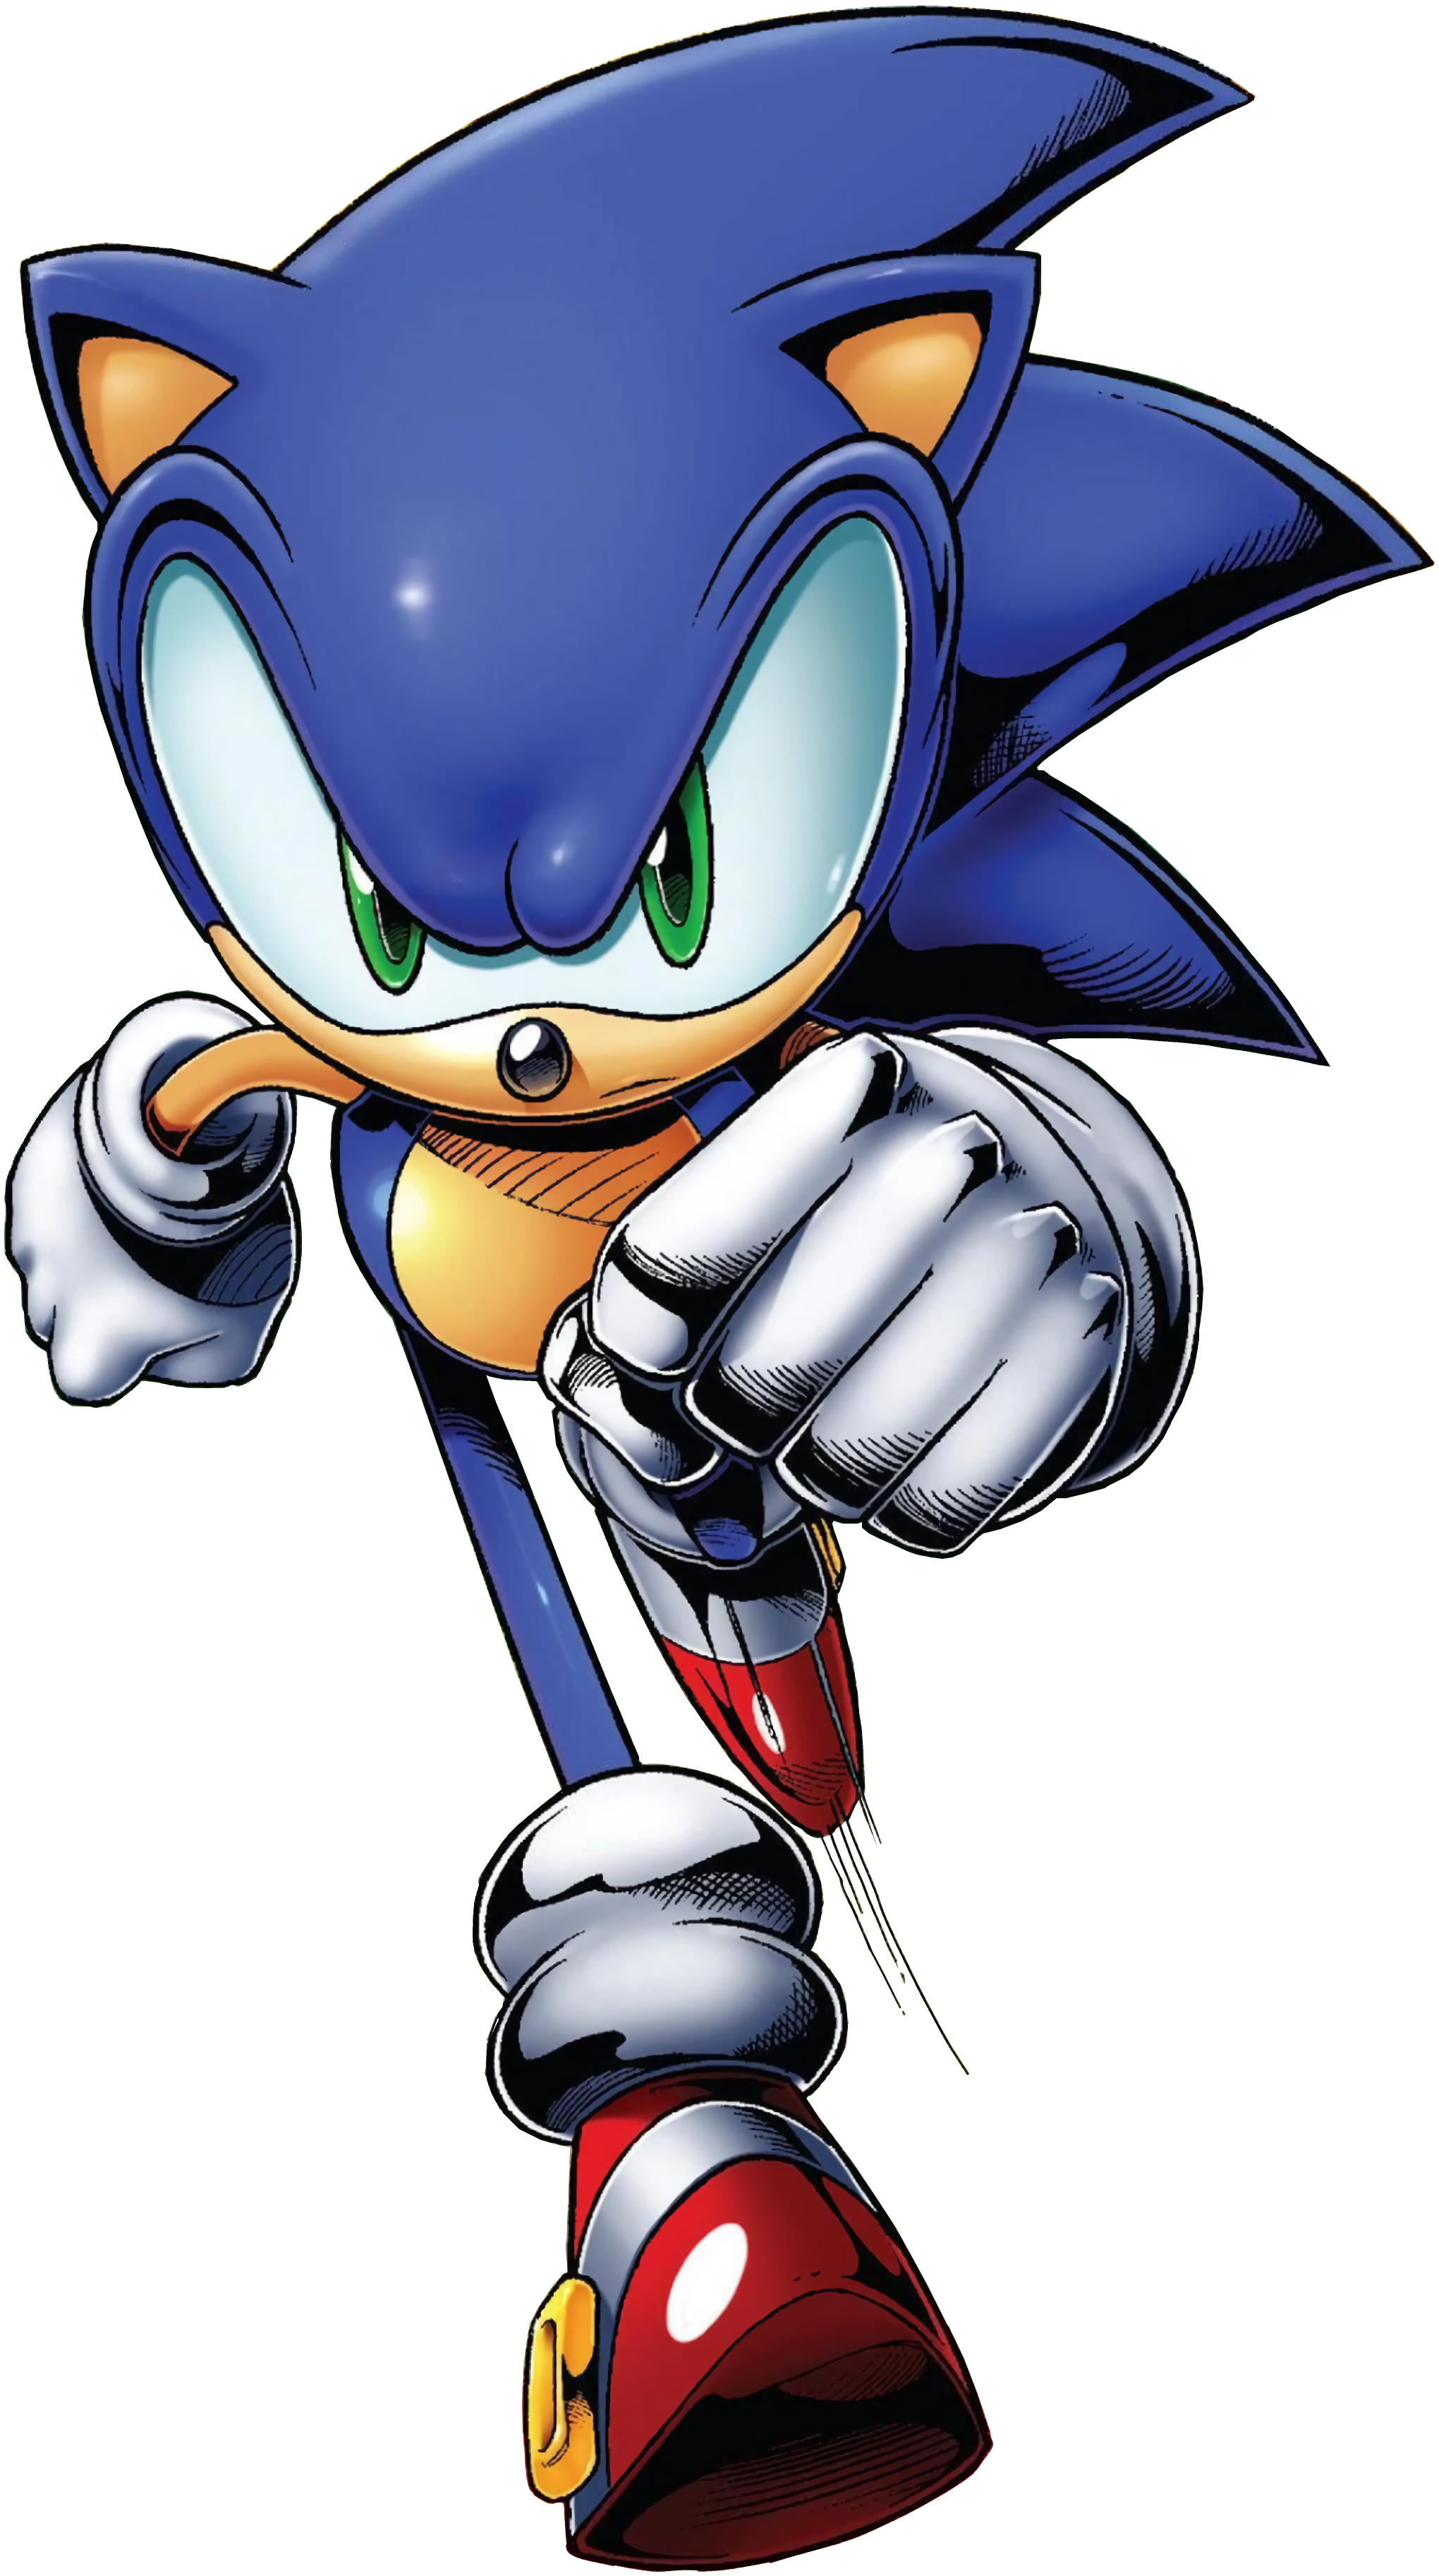 Who made Sonic.exe? And why? - Quora